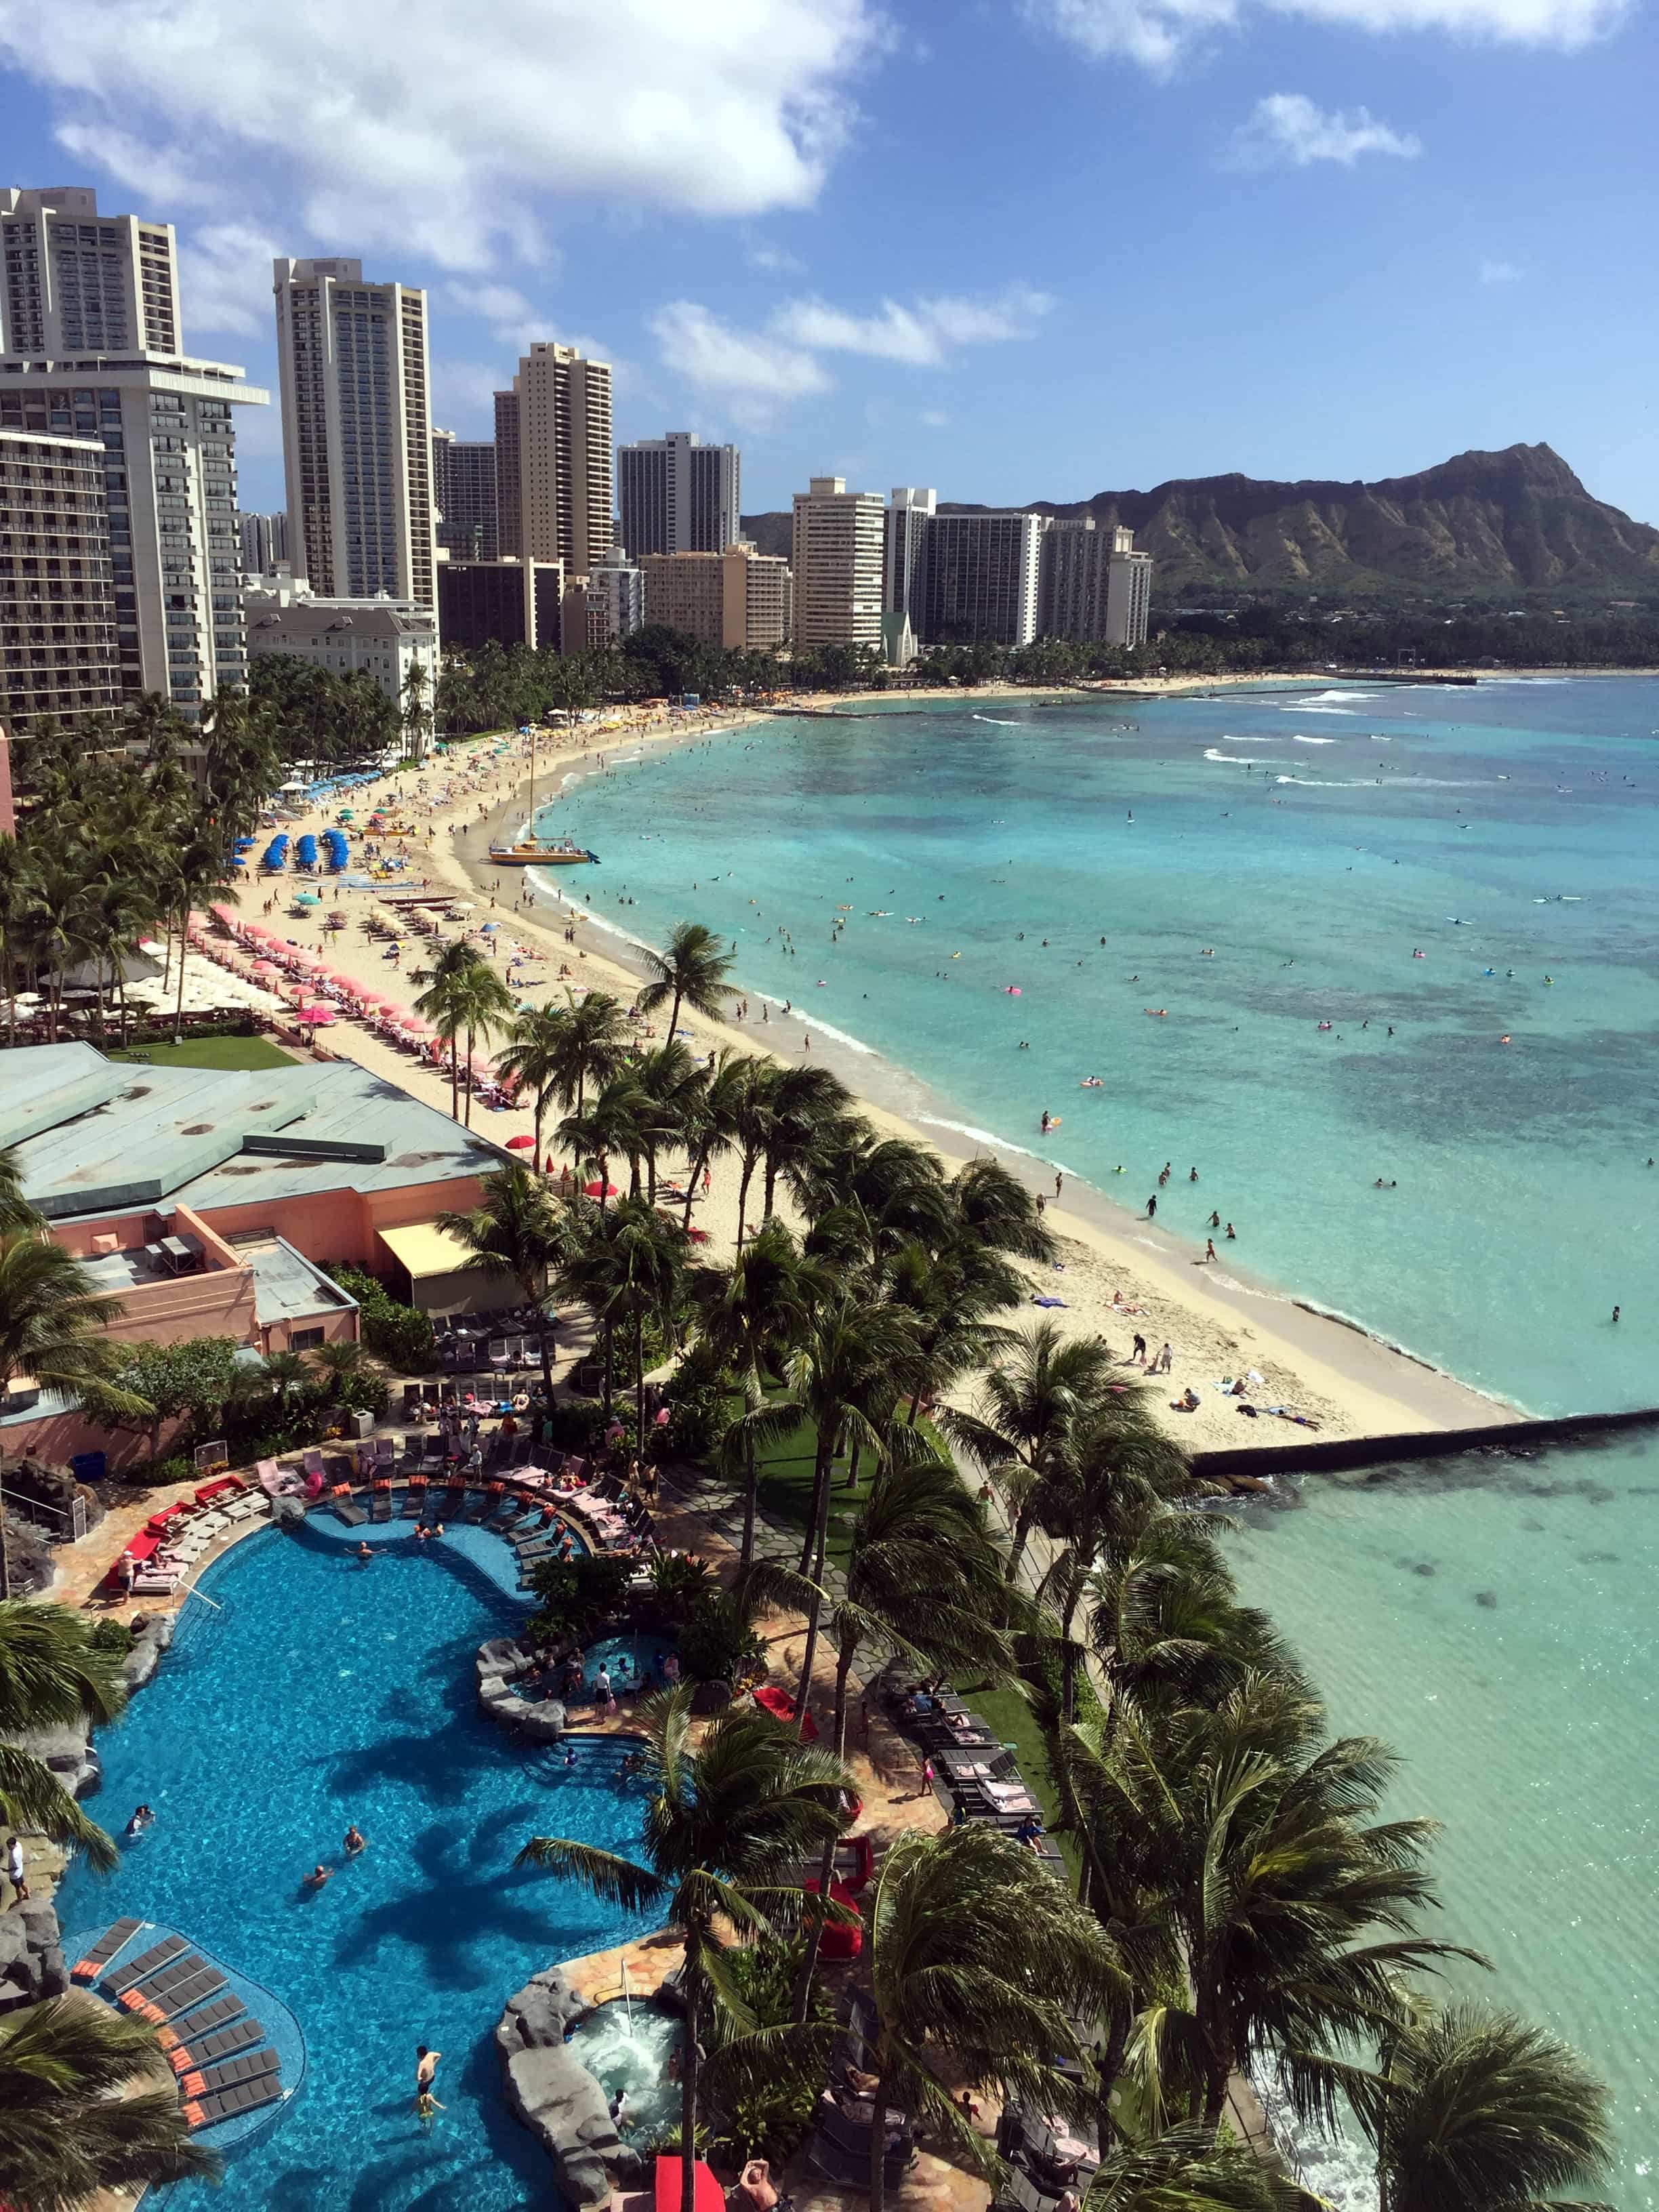 Waikiki Beach is a good place to stay when planning for Hawaii on a budget (photo: yestoforever, Pixabay)